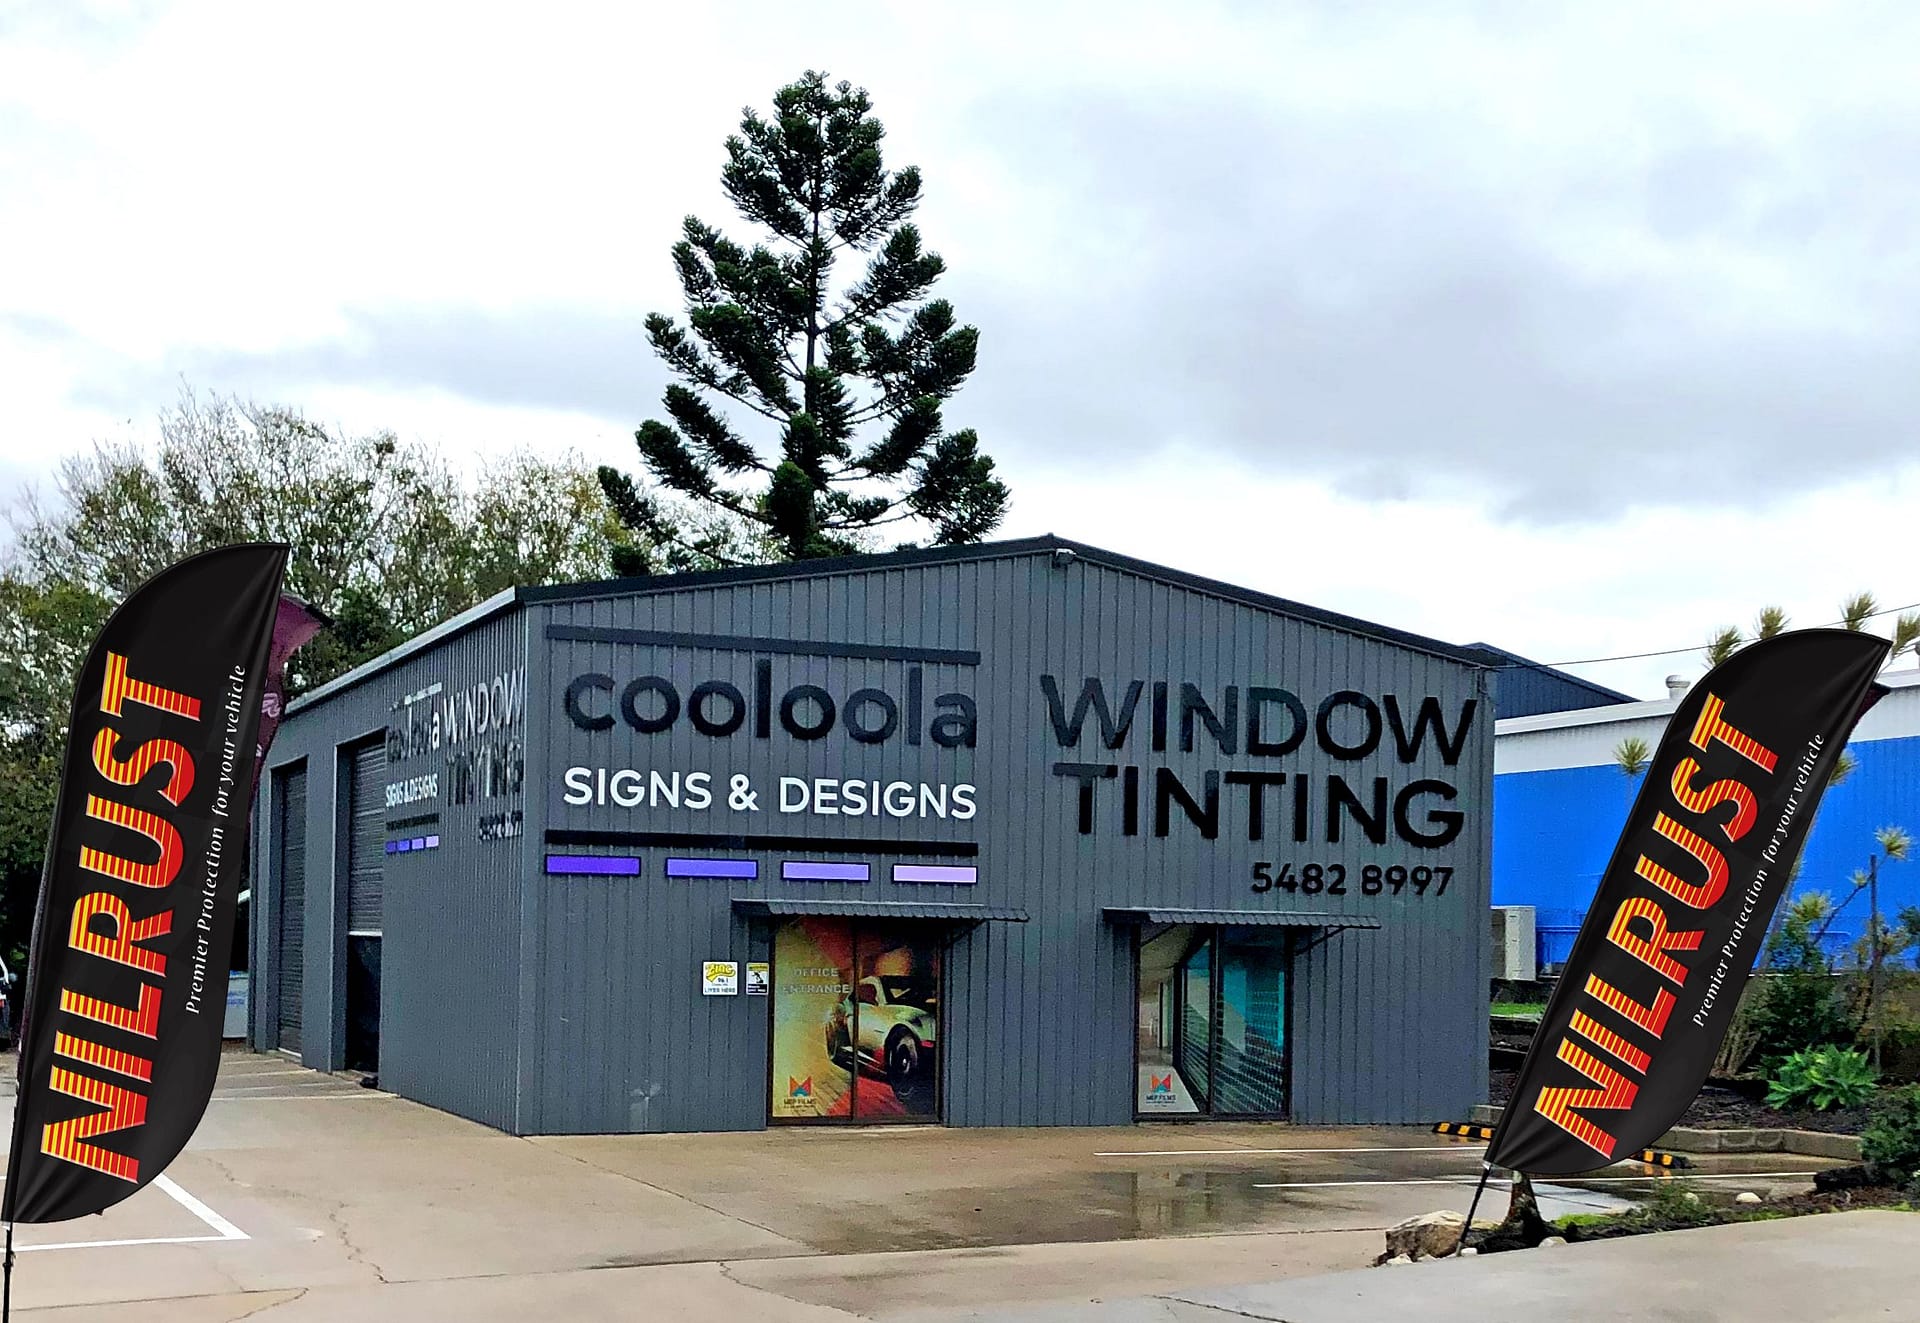 Cooloola Window Tinting: Signs & Designs Shop front